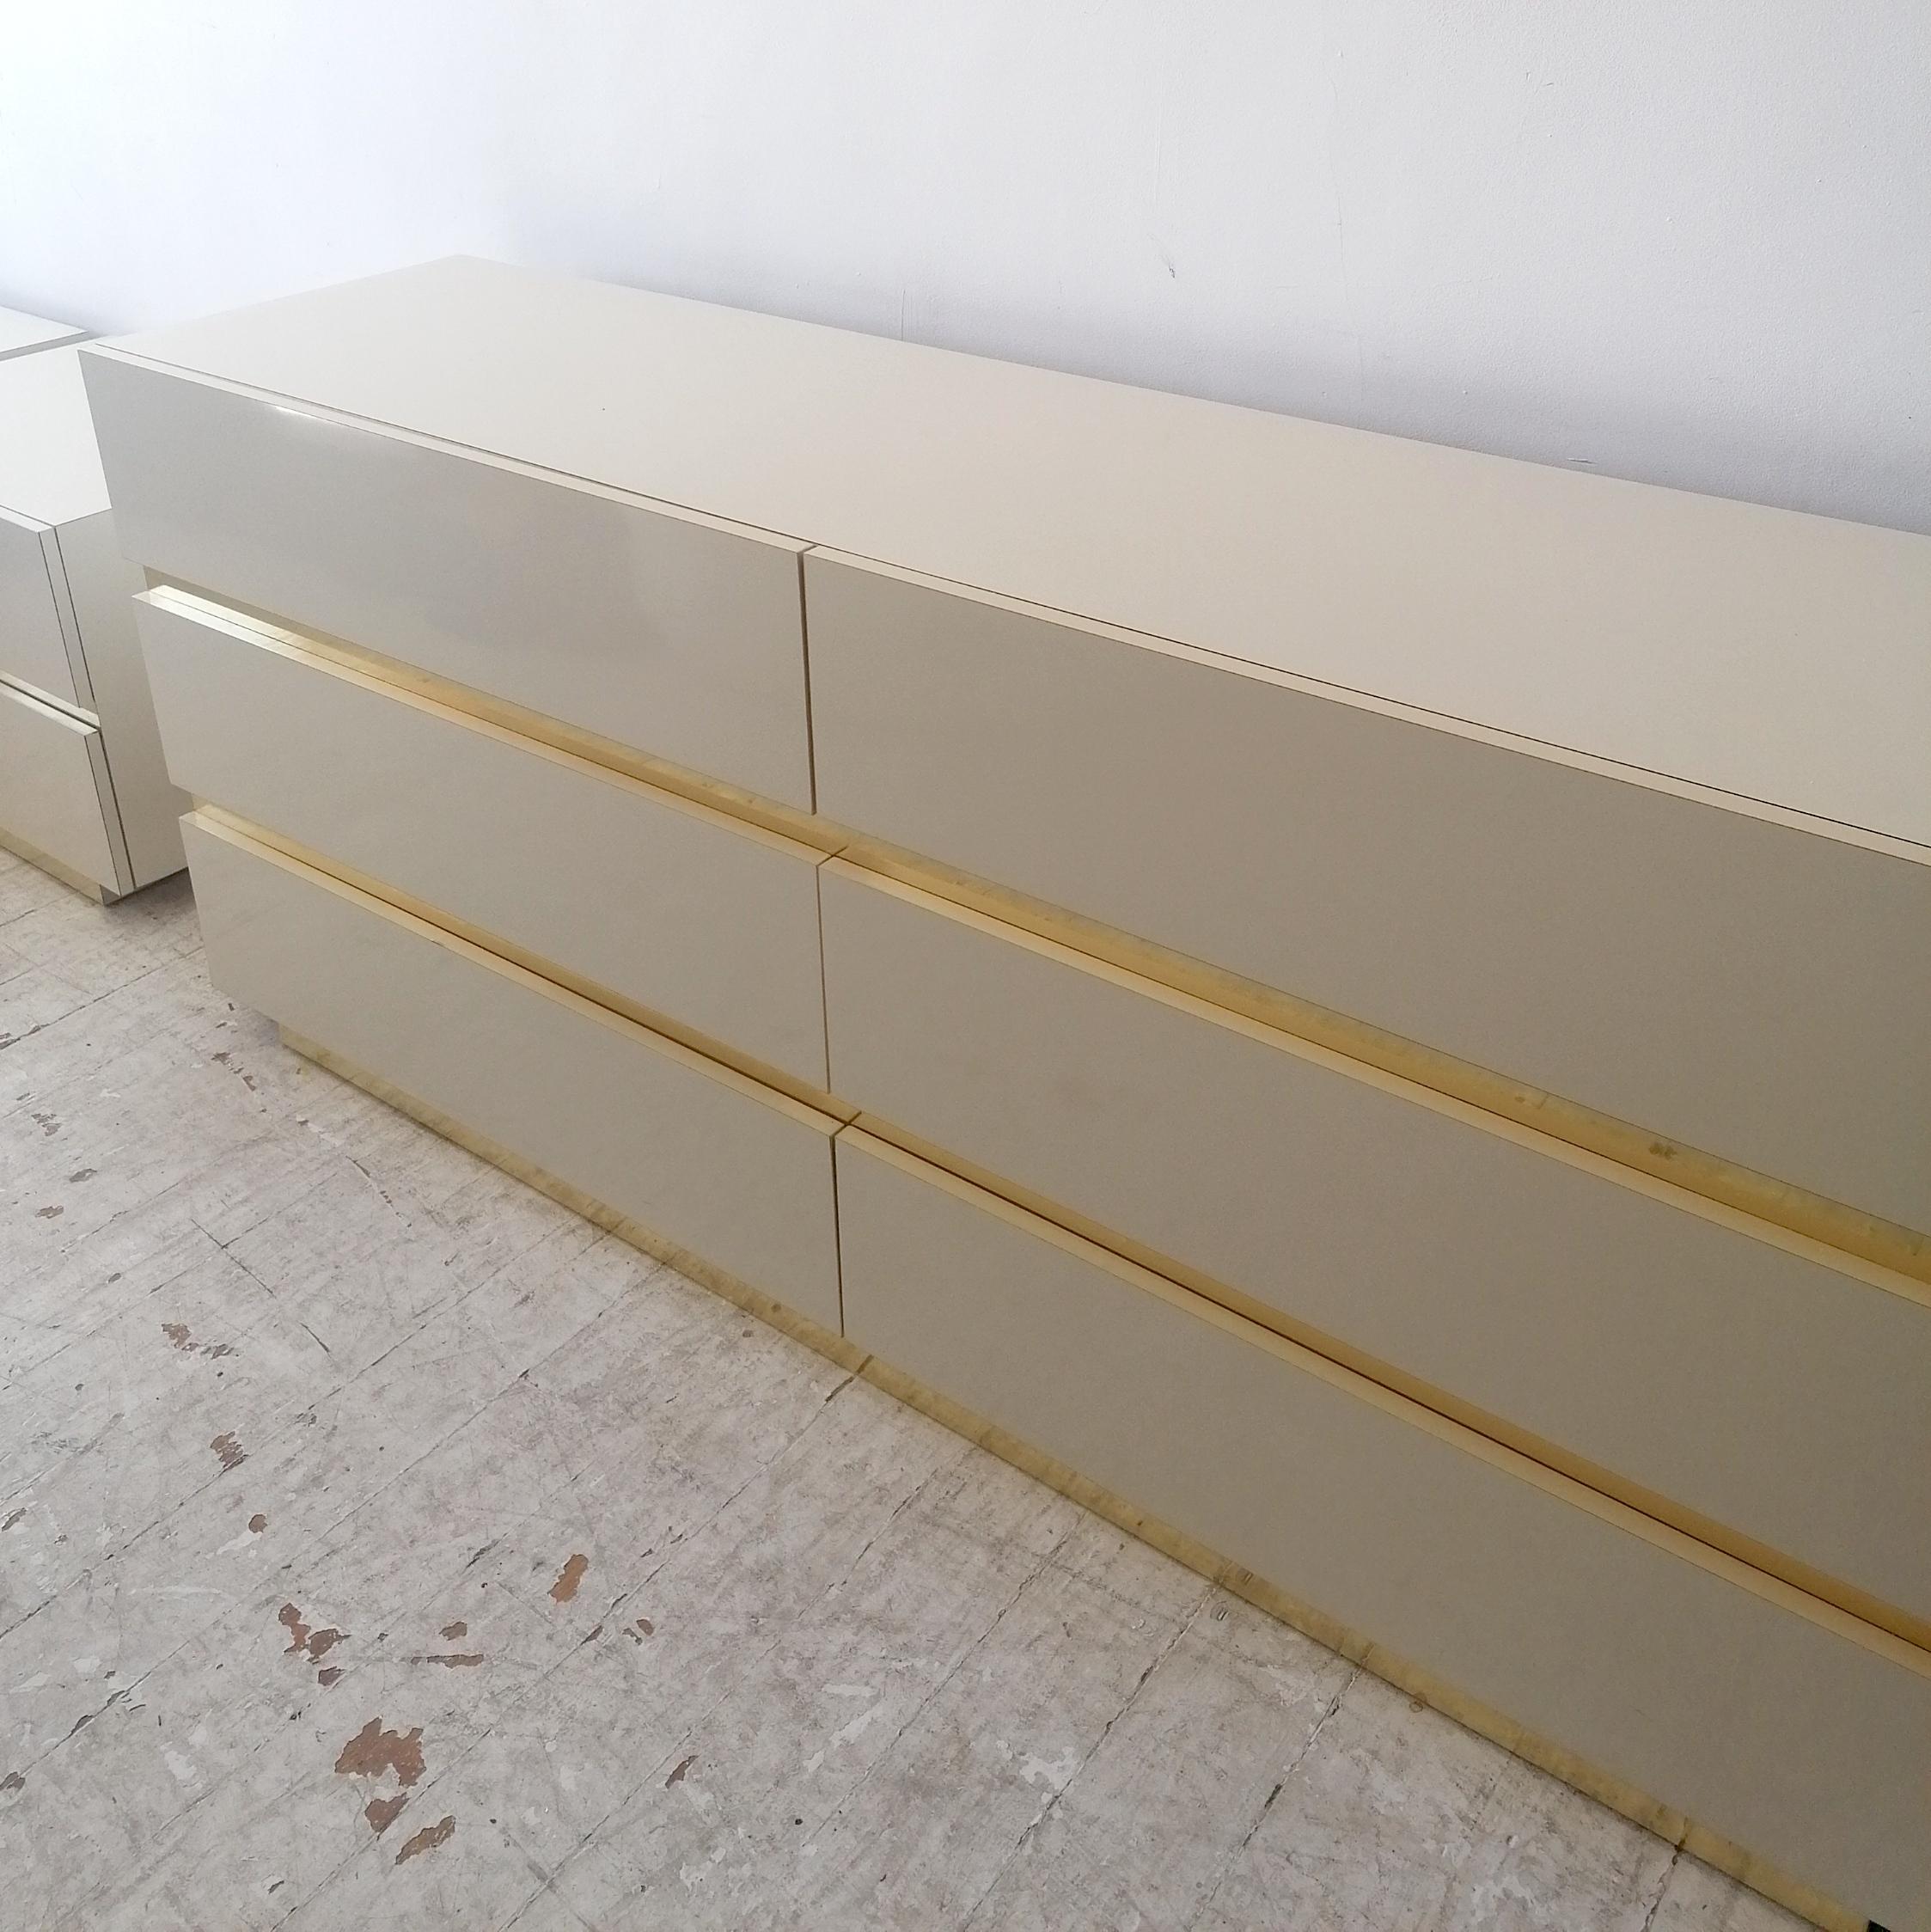 1980s American cream & gold metal sideboard / dresser with drawers For Sale 4